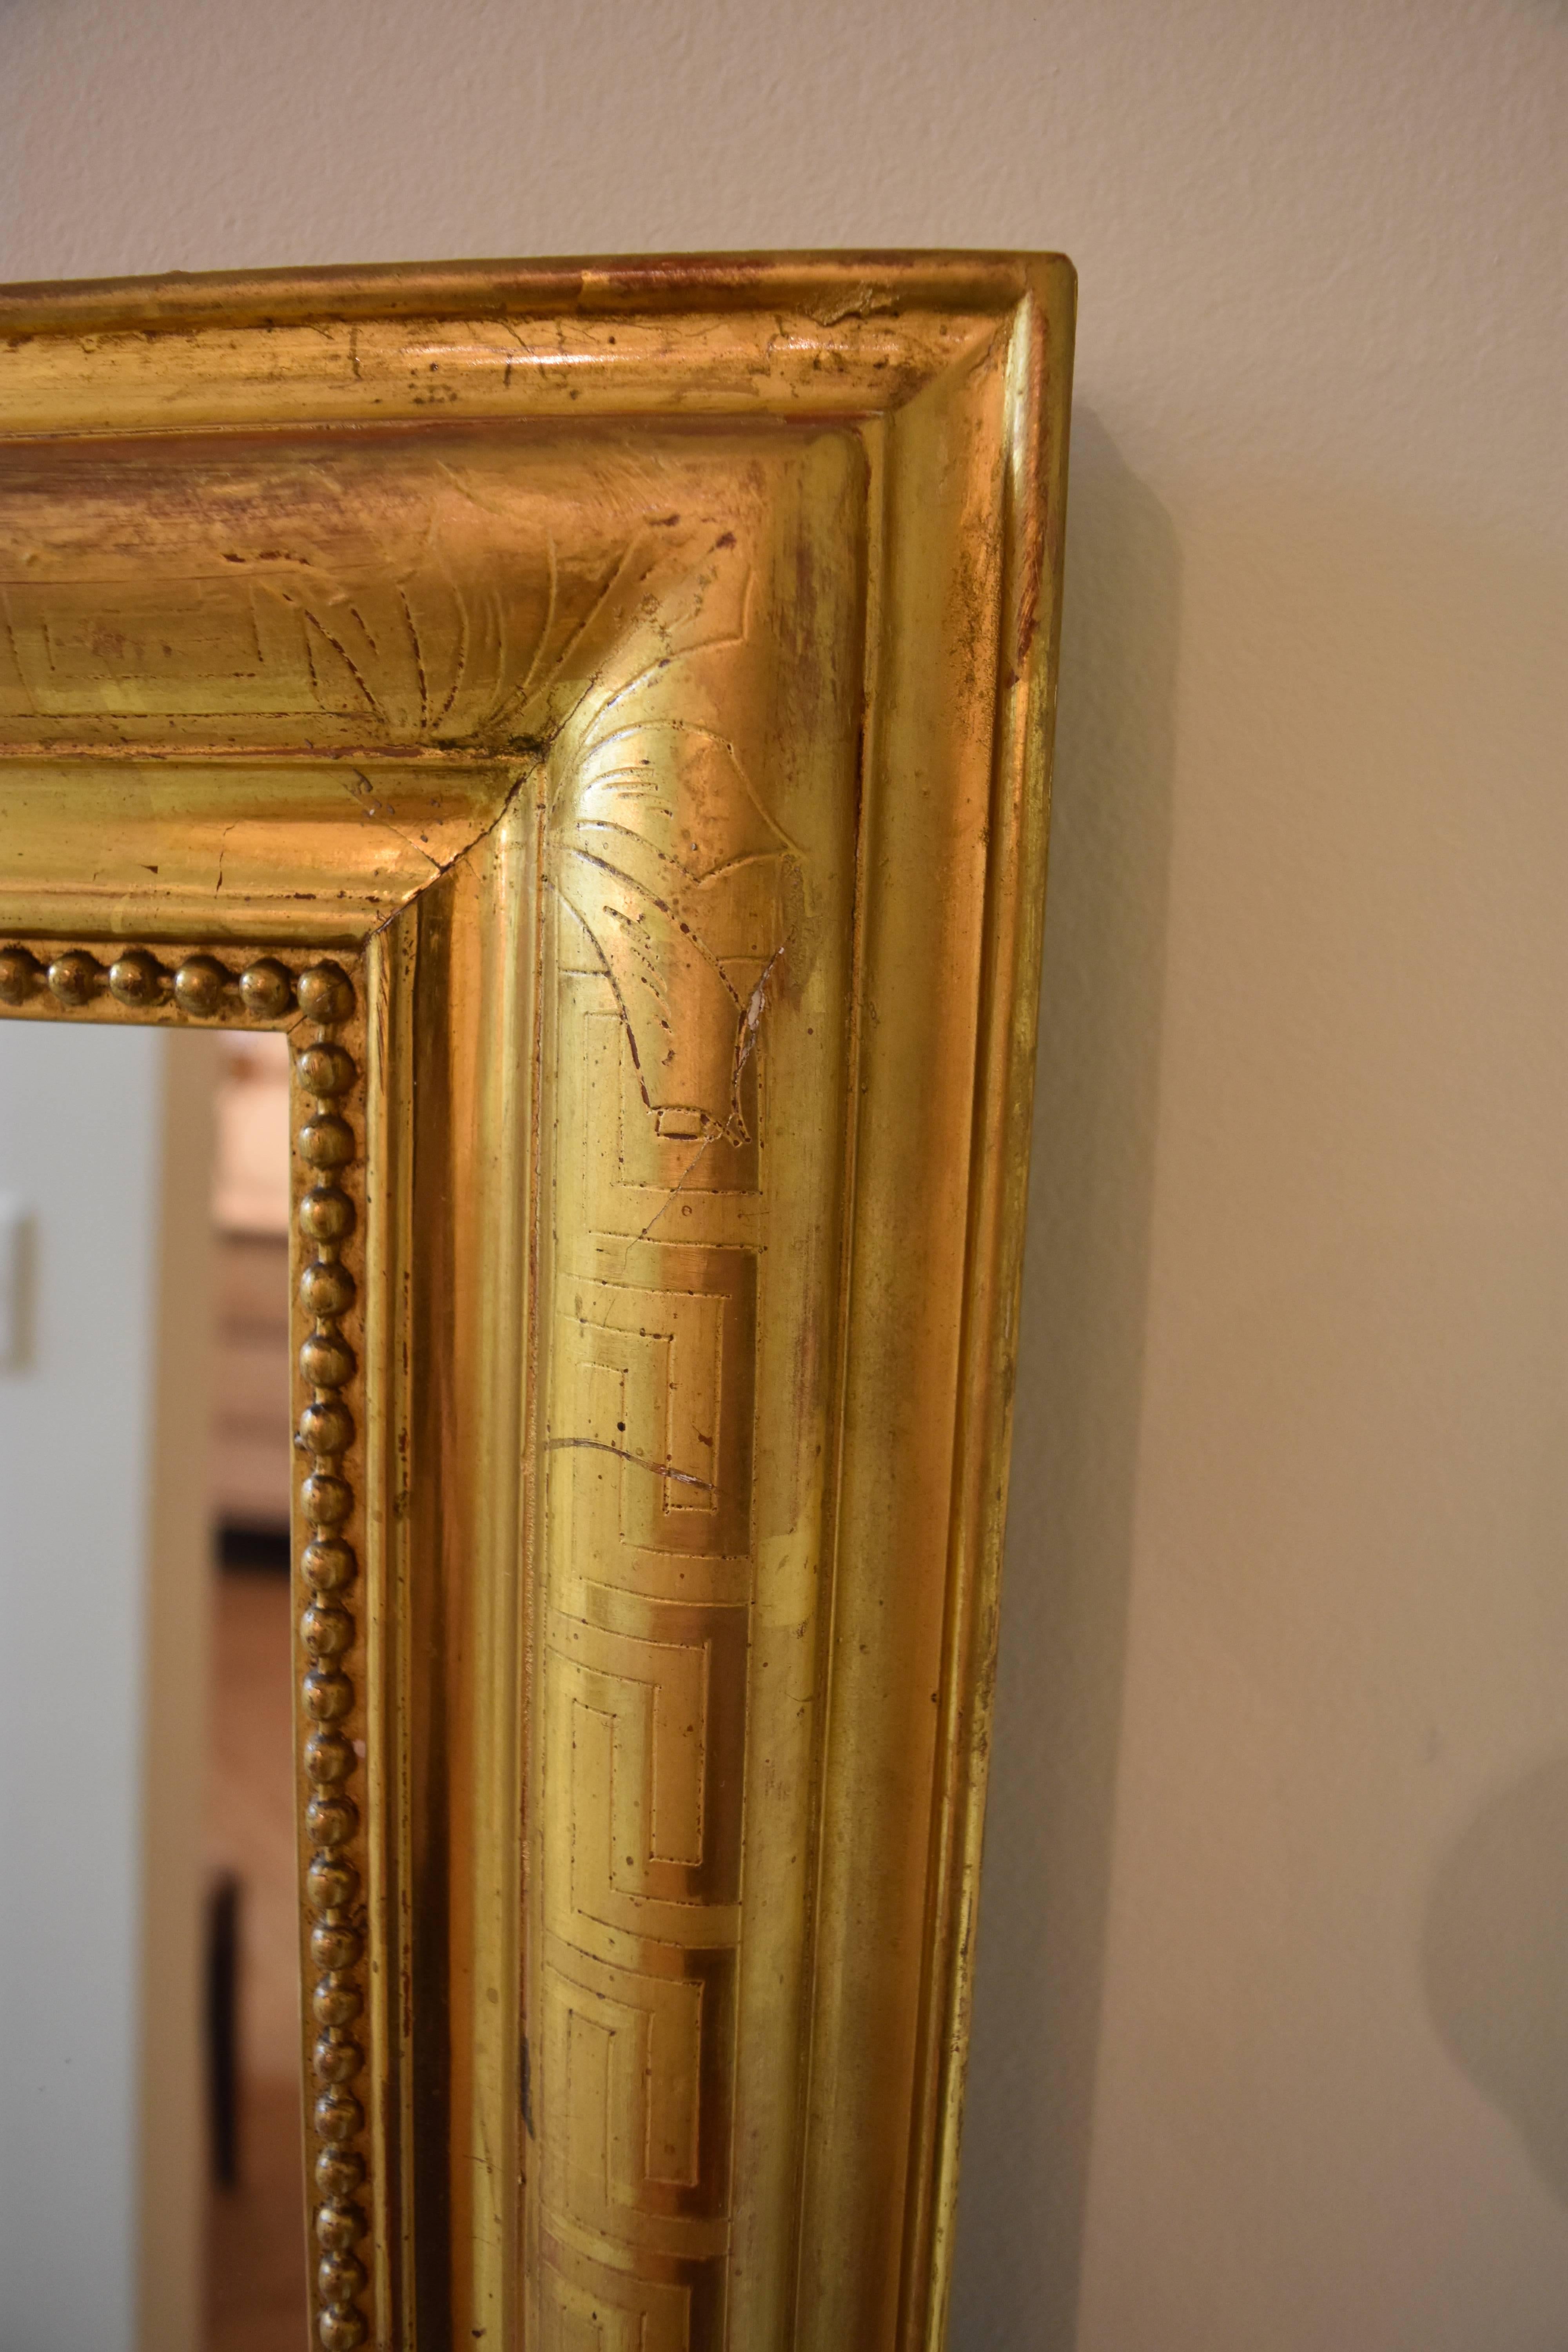 This large 19th century Louis Philippe giltwood mantel mirror features beading and a Greek key design.